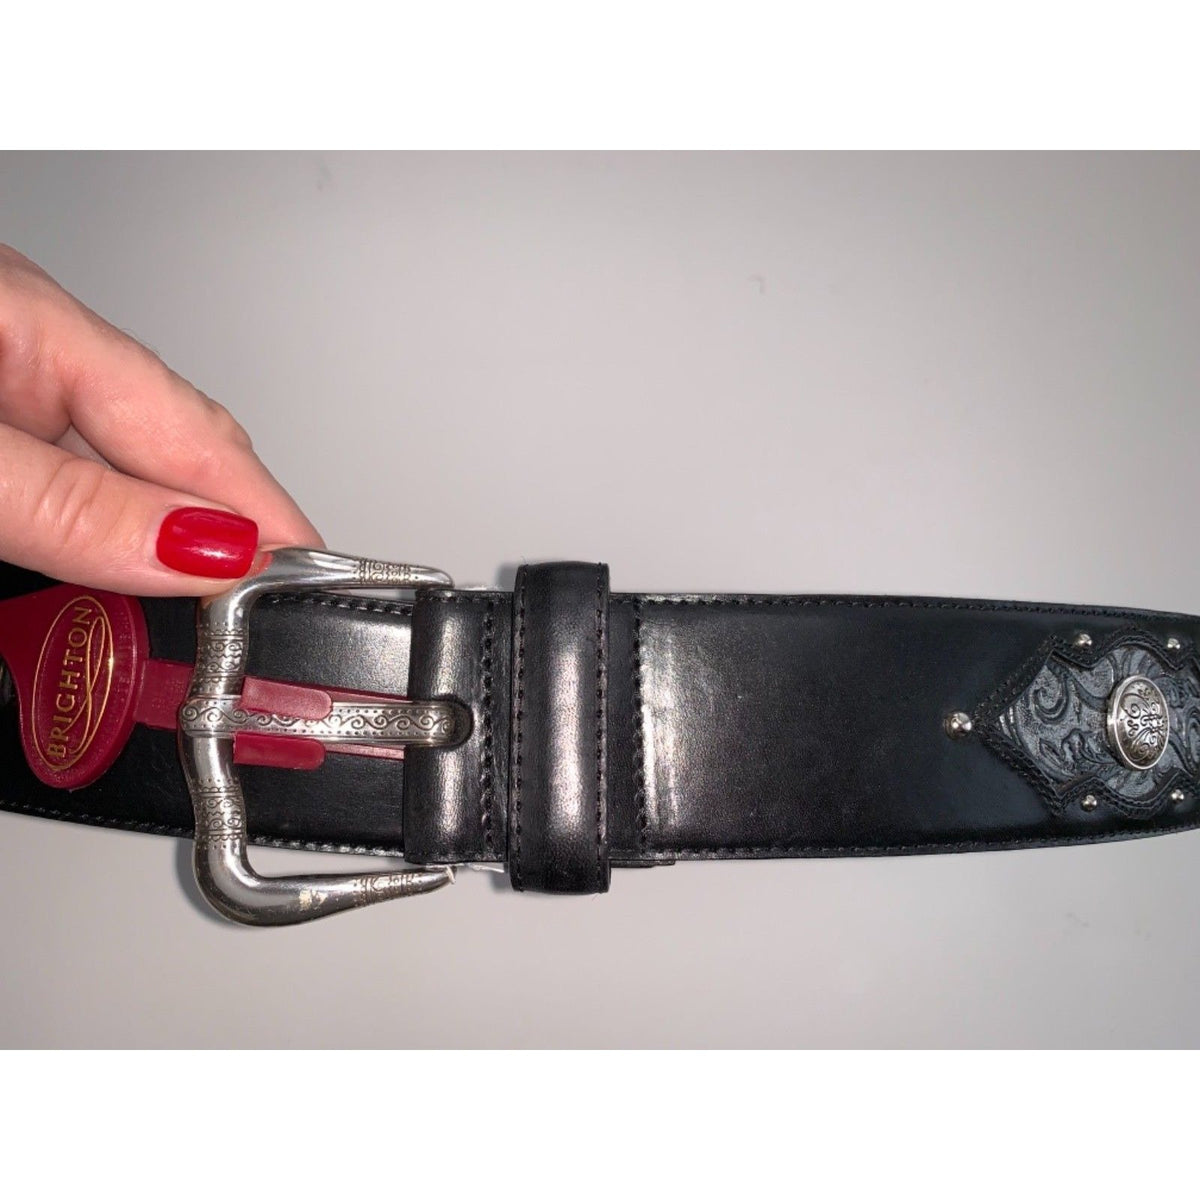 BRIGHTON M/L 32 wide black leather belt w/ lots of silver Burn Out